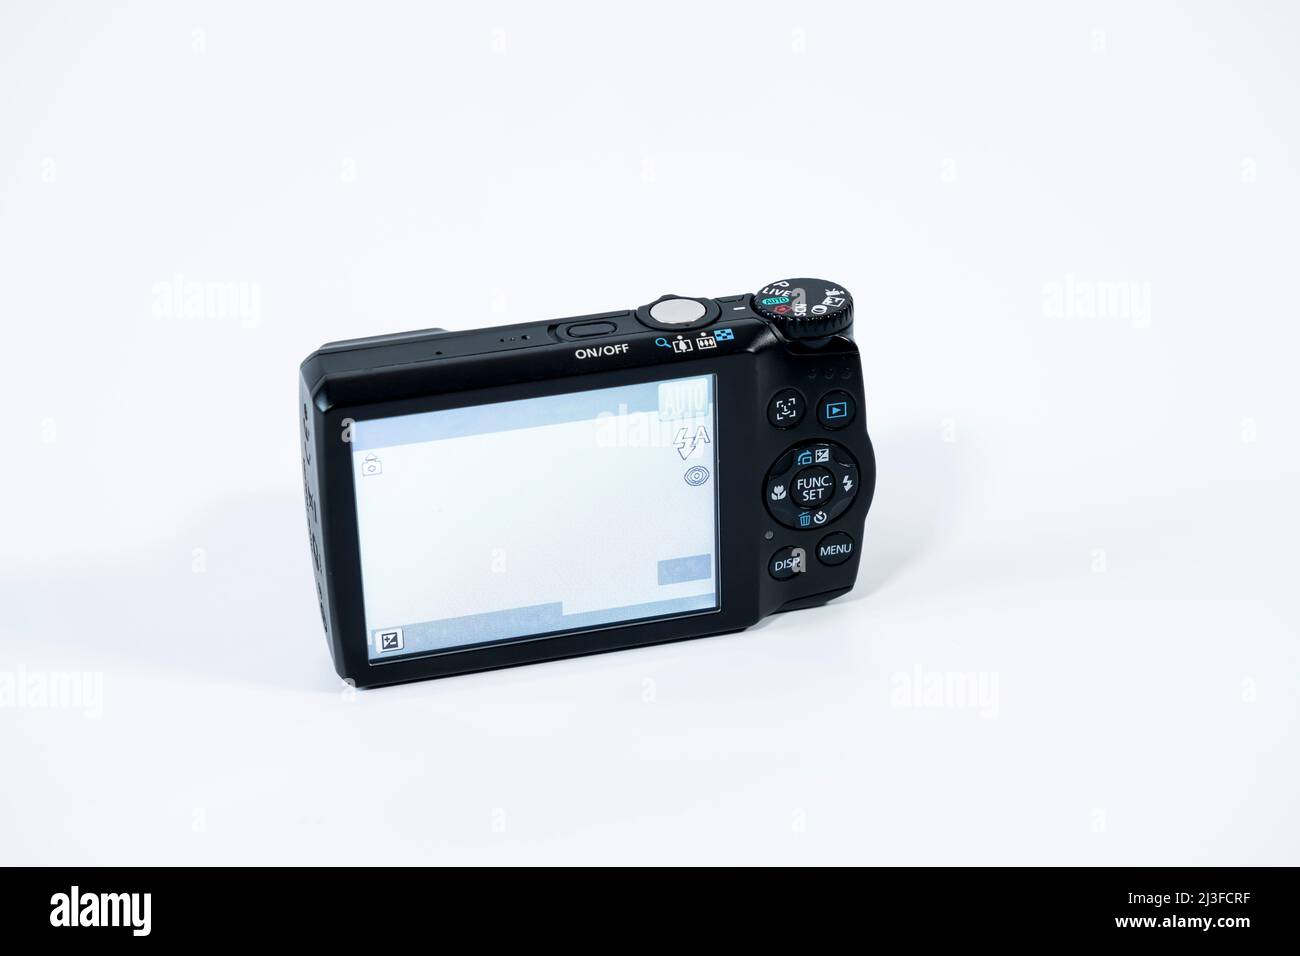 Photographed from the back on a white background with the old compact camera lcd screen visible. 07-02-2022 istanbul Stock Photo